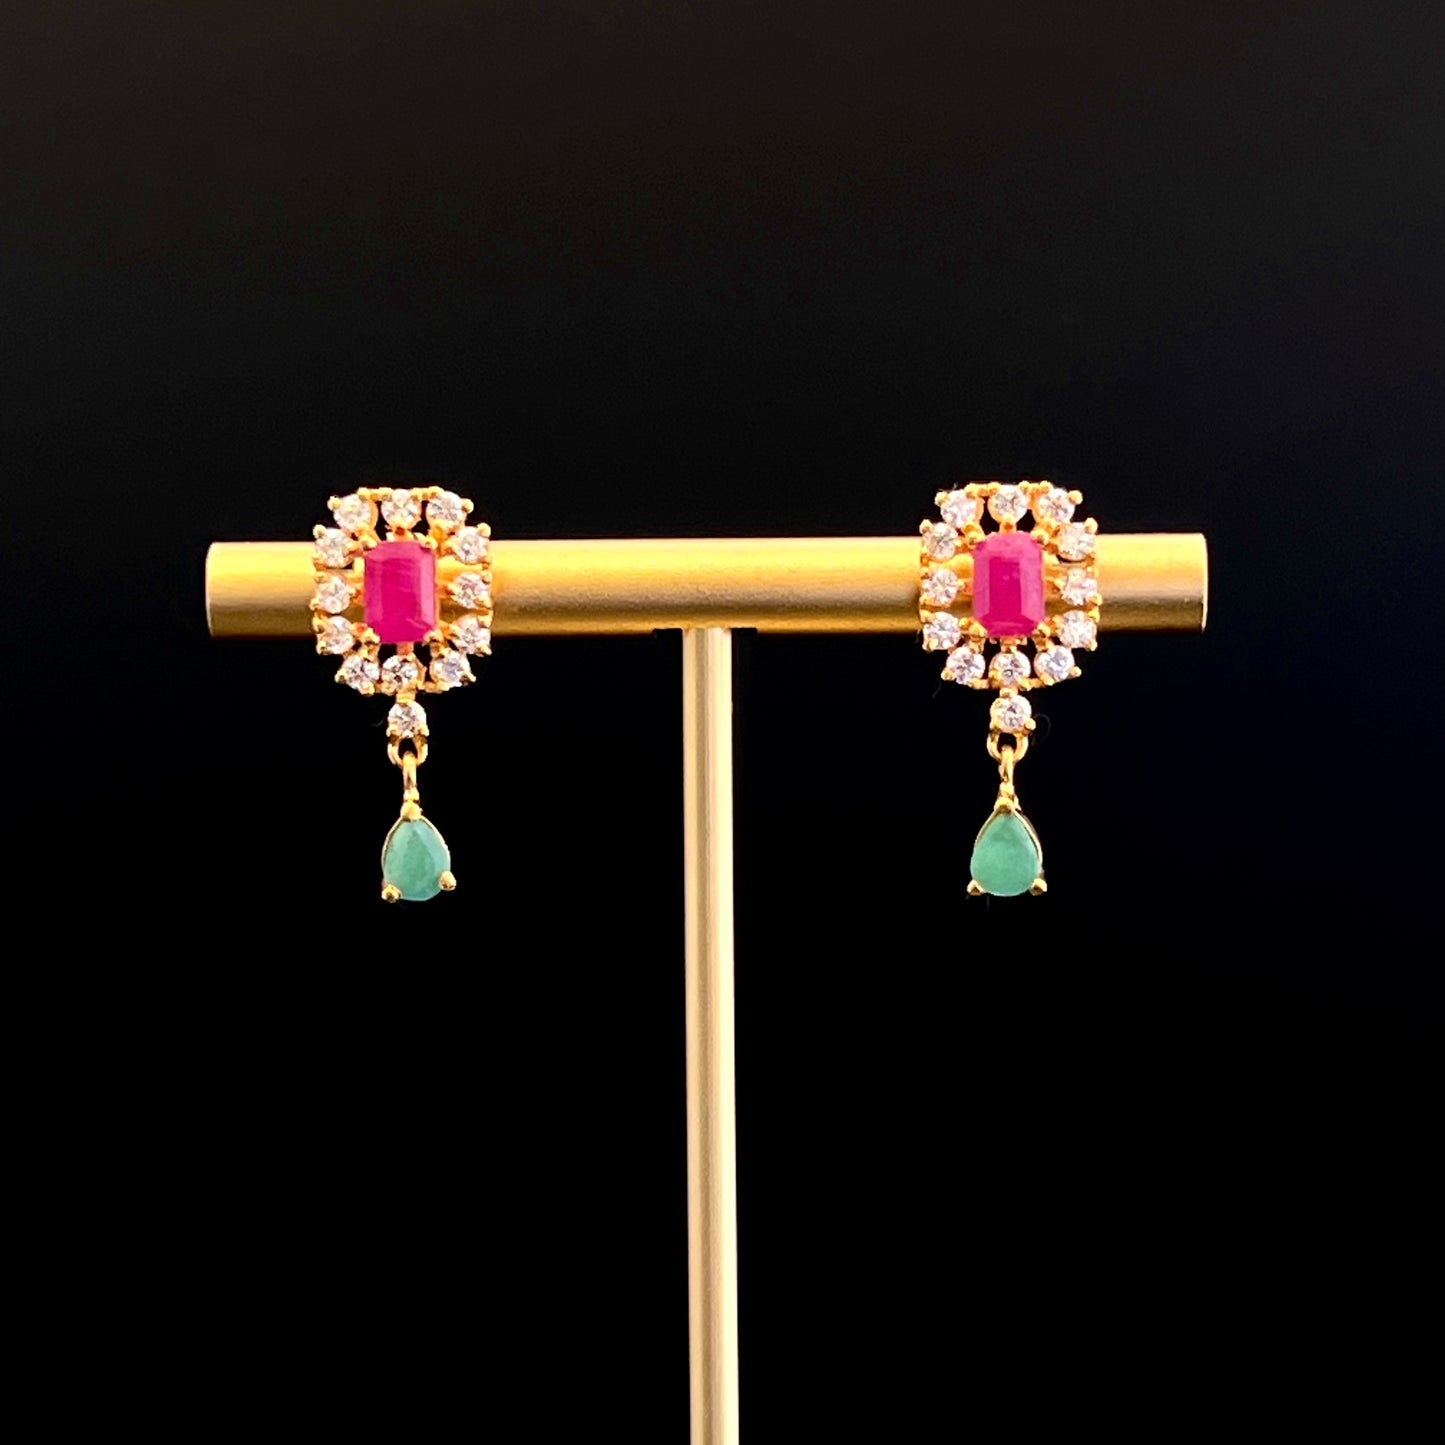 Emerald-Cut Ruby Earrings with CZ and Pear-Cut Emerald